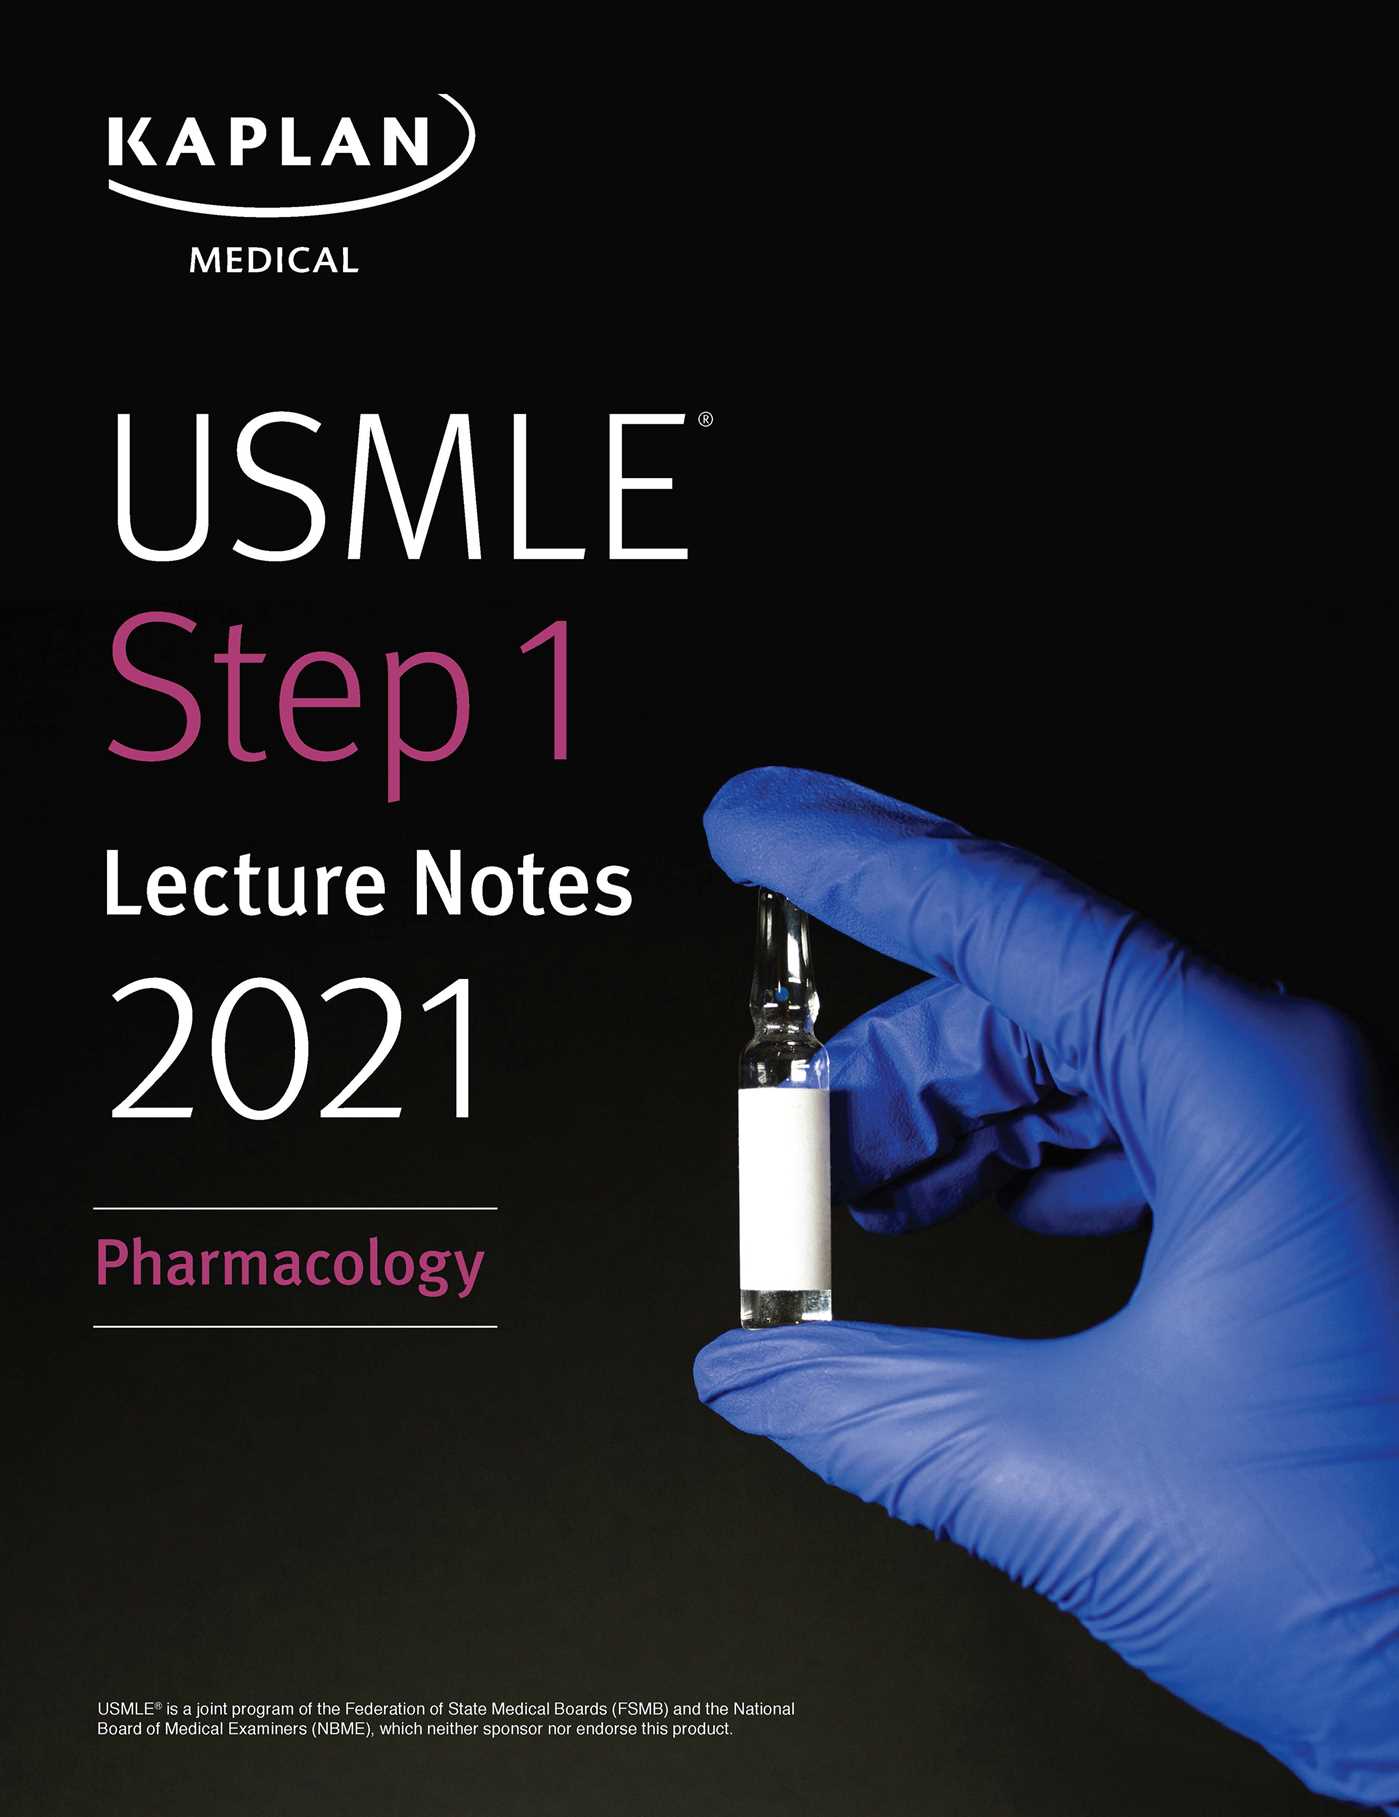 USMLE STEP 1 LECTURE NOTES PHARMACOLOGY